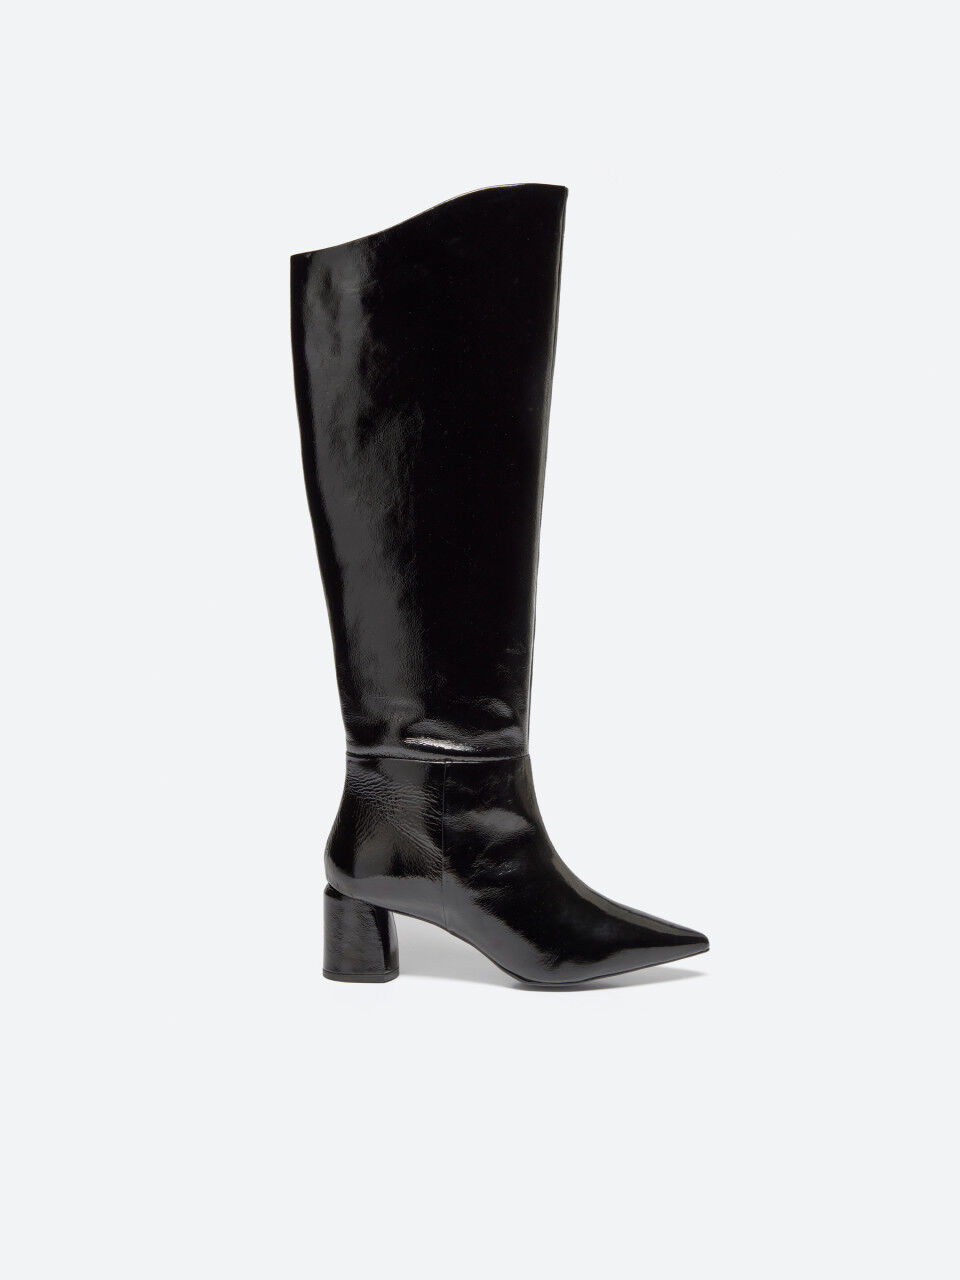 High patent leather boots